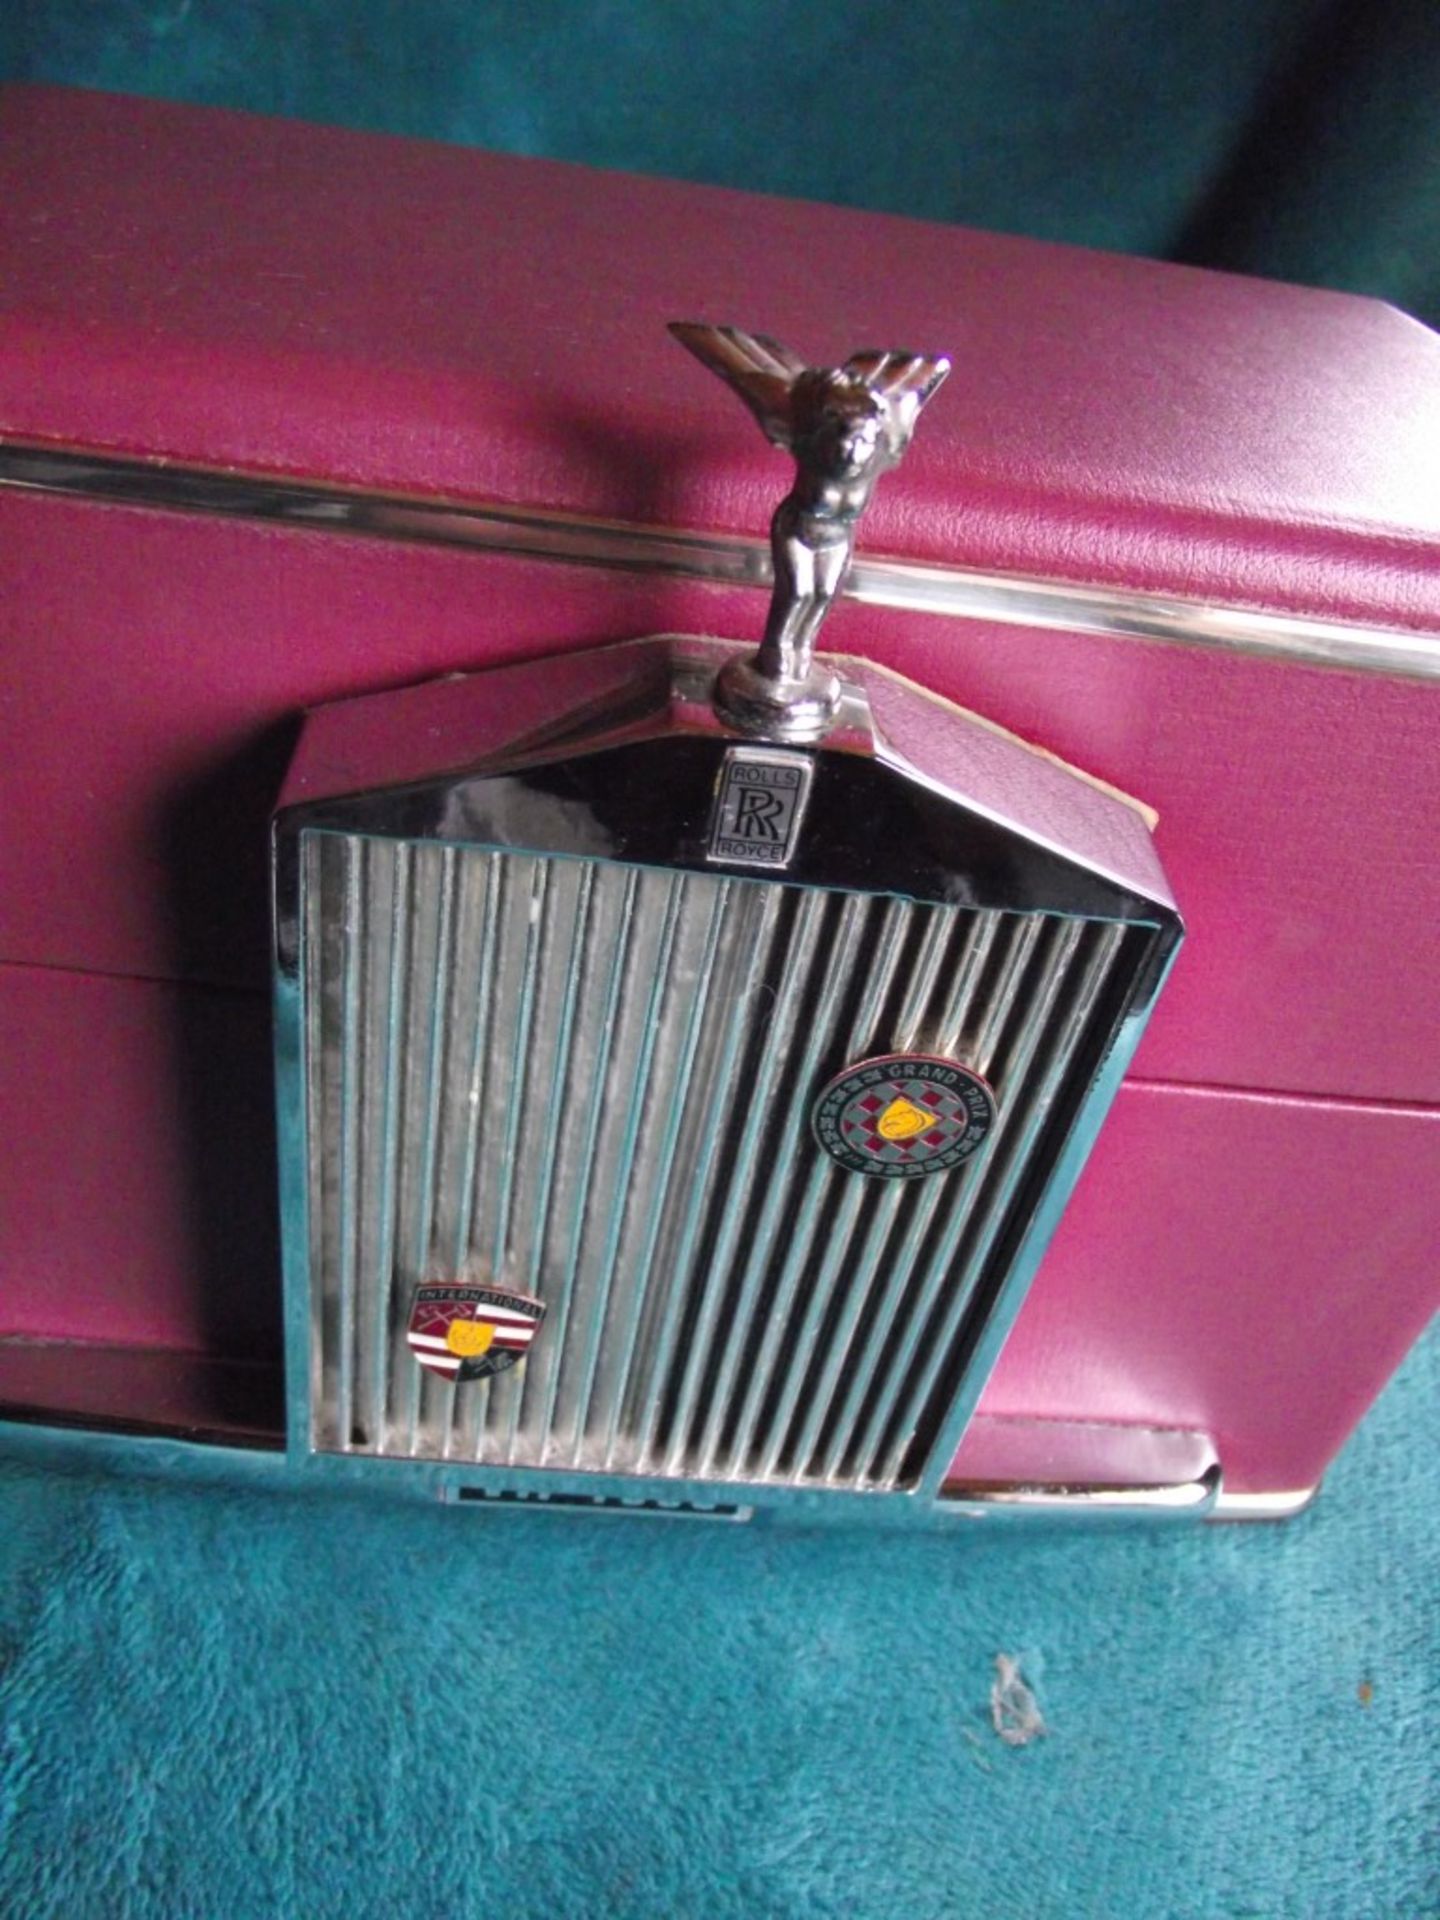 Rare - Vintage Rolls Royce Decanter Set with Fitted Box - VIP Model - Circa 1960 - Image 16 of 16